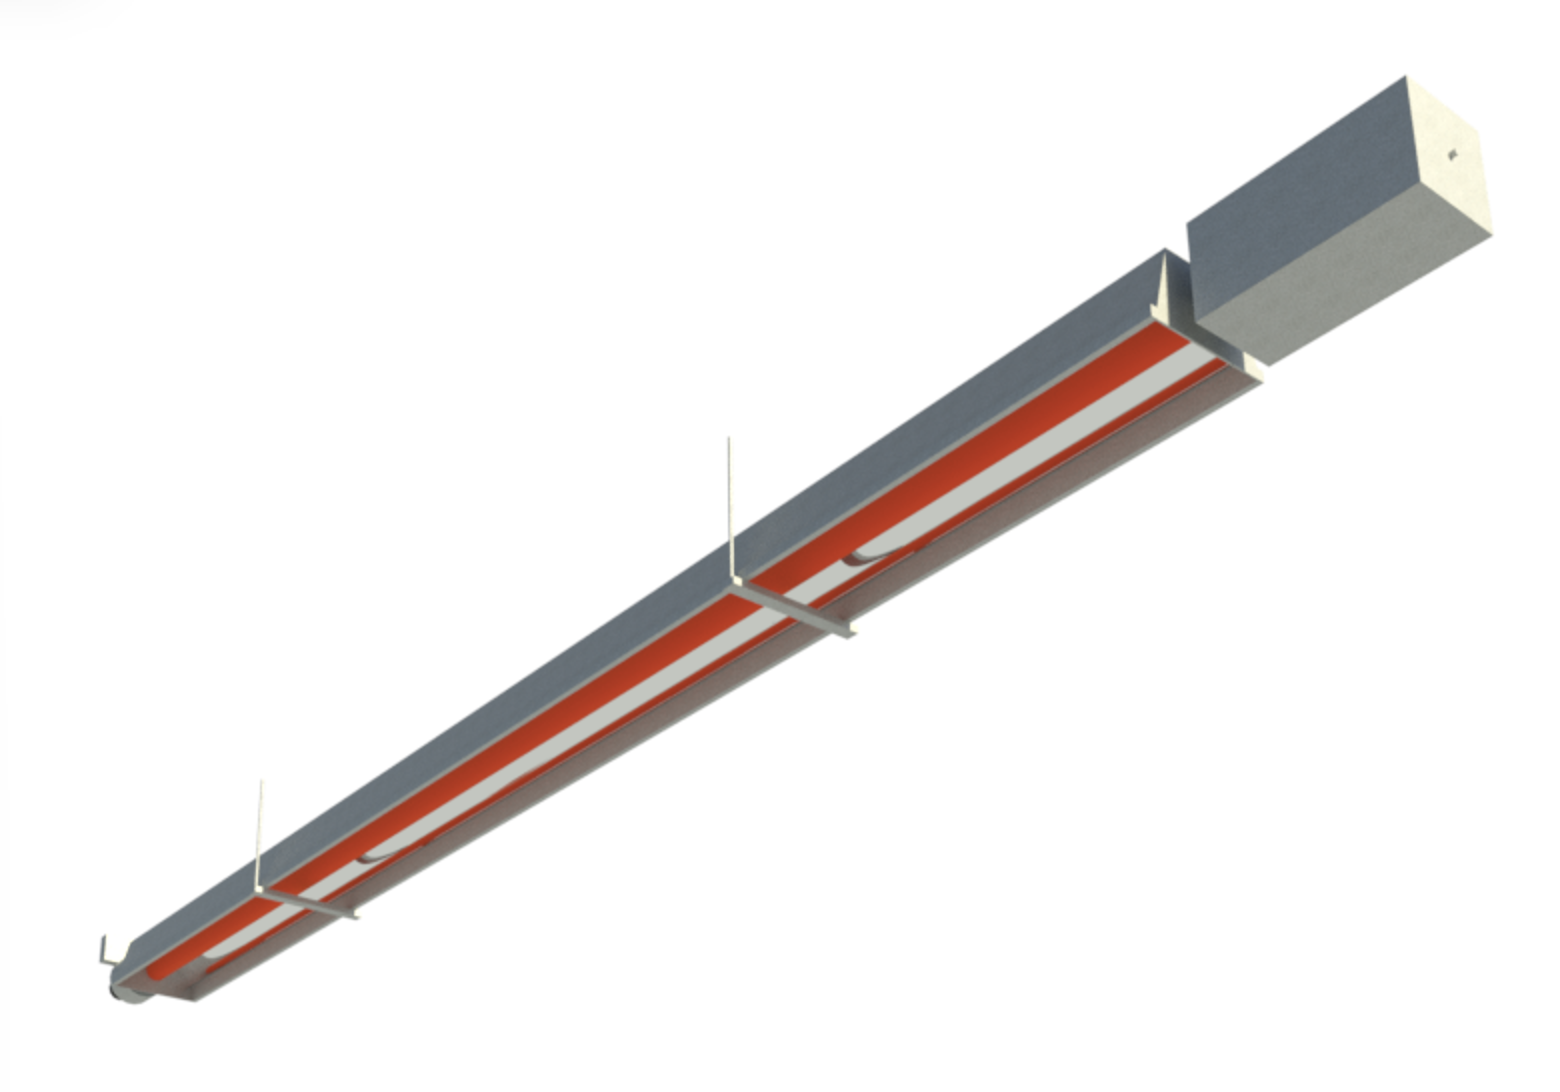 Render of the linear, L-Shaped radiant tube heater from maufacturer Space-Ray. The tube is made of metal and emits infrared radiation